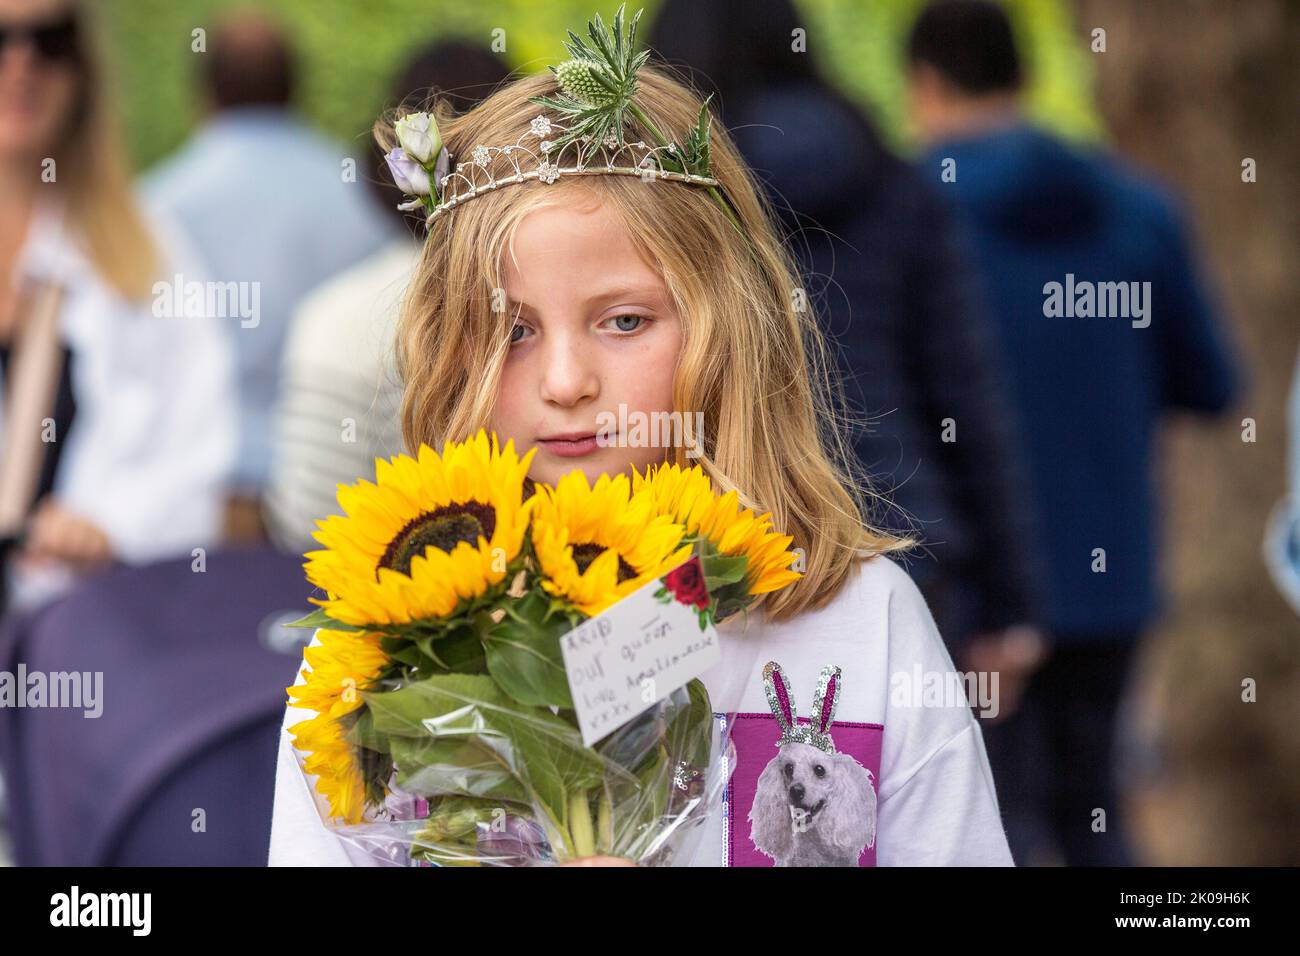 London UK 10th September 2022 - A young girl, Amelia-Rose, brings flowers with message , RIP our Queen - Mourners gather at Buckingham Palace placing flowers and paying their respects - Queen Elizabeth the second died yesterday in her Platinum Jubillee year at Balmoral Castle. Photo Horst A. Friedrichs Alamy Live News Stock Photo